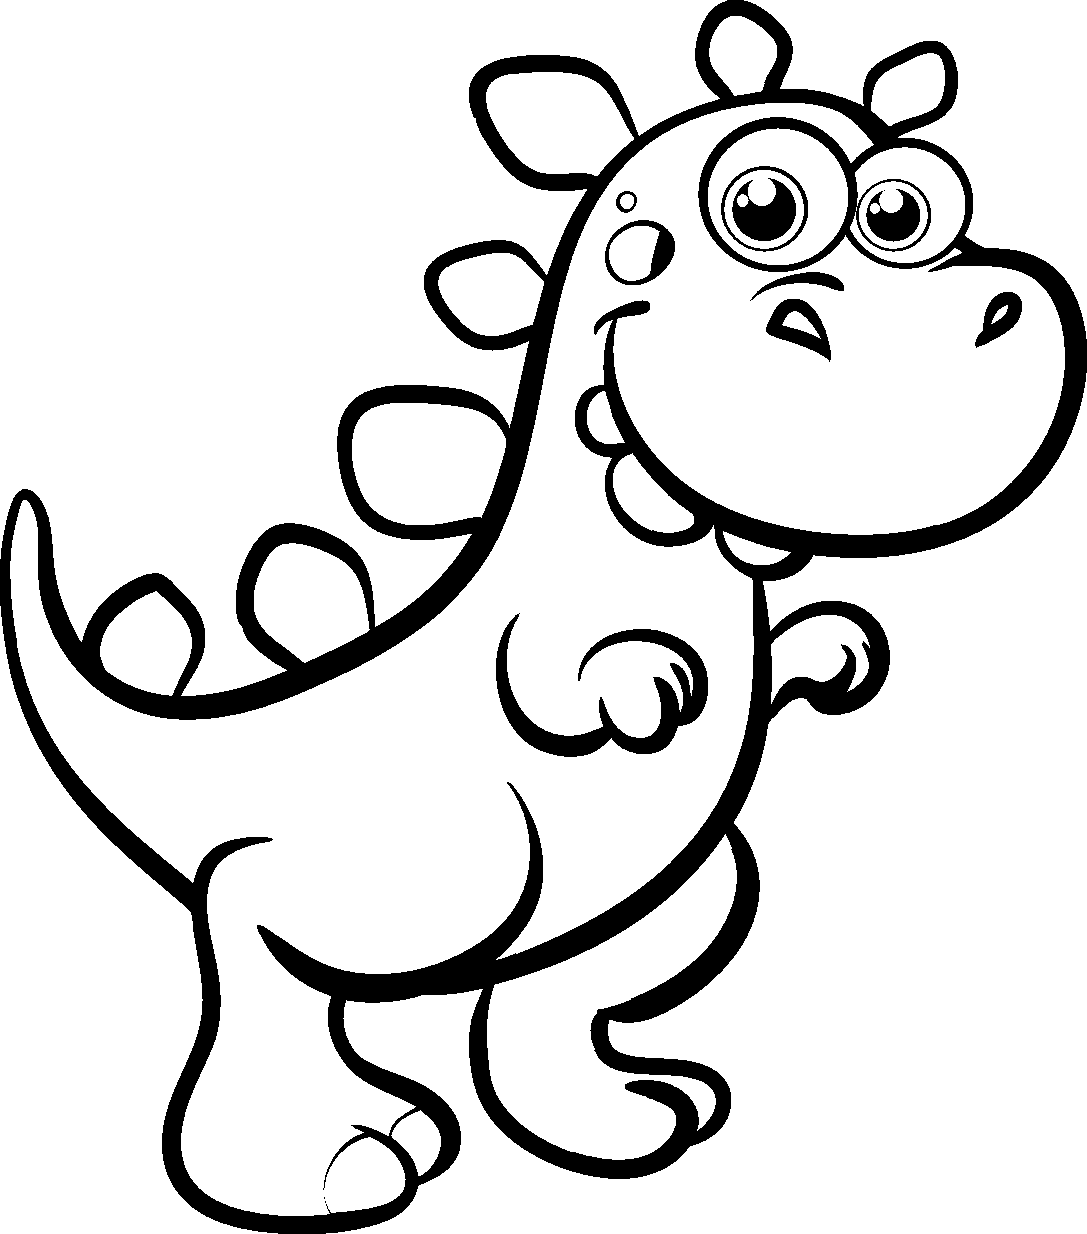 Download Cute Dinosaur Coloring Pages For Kids - Coloring Home